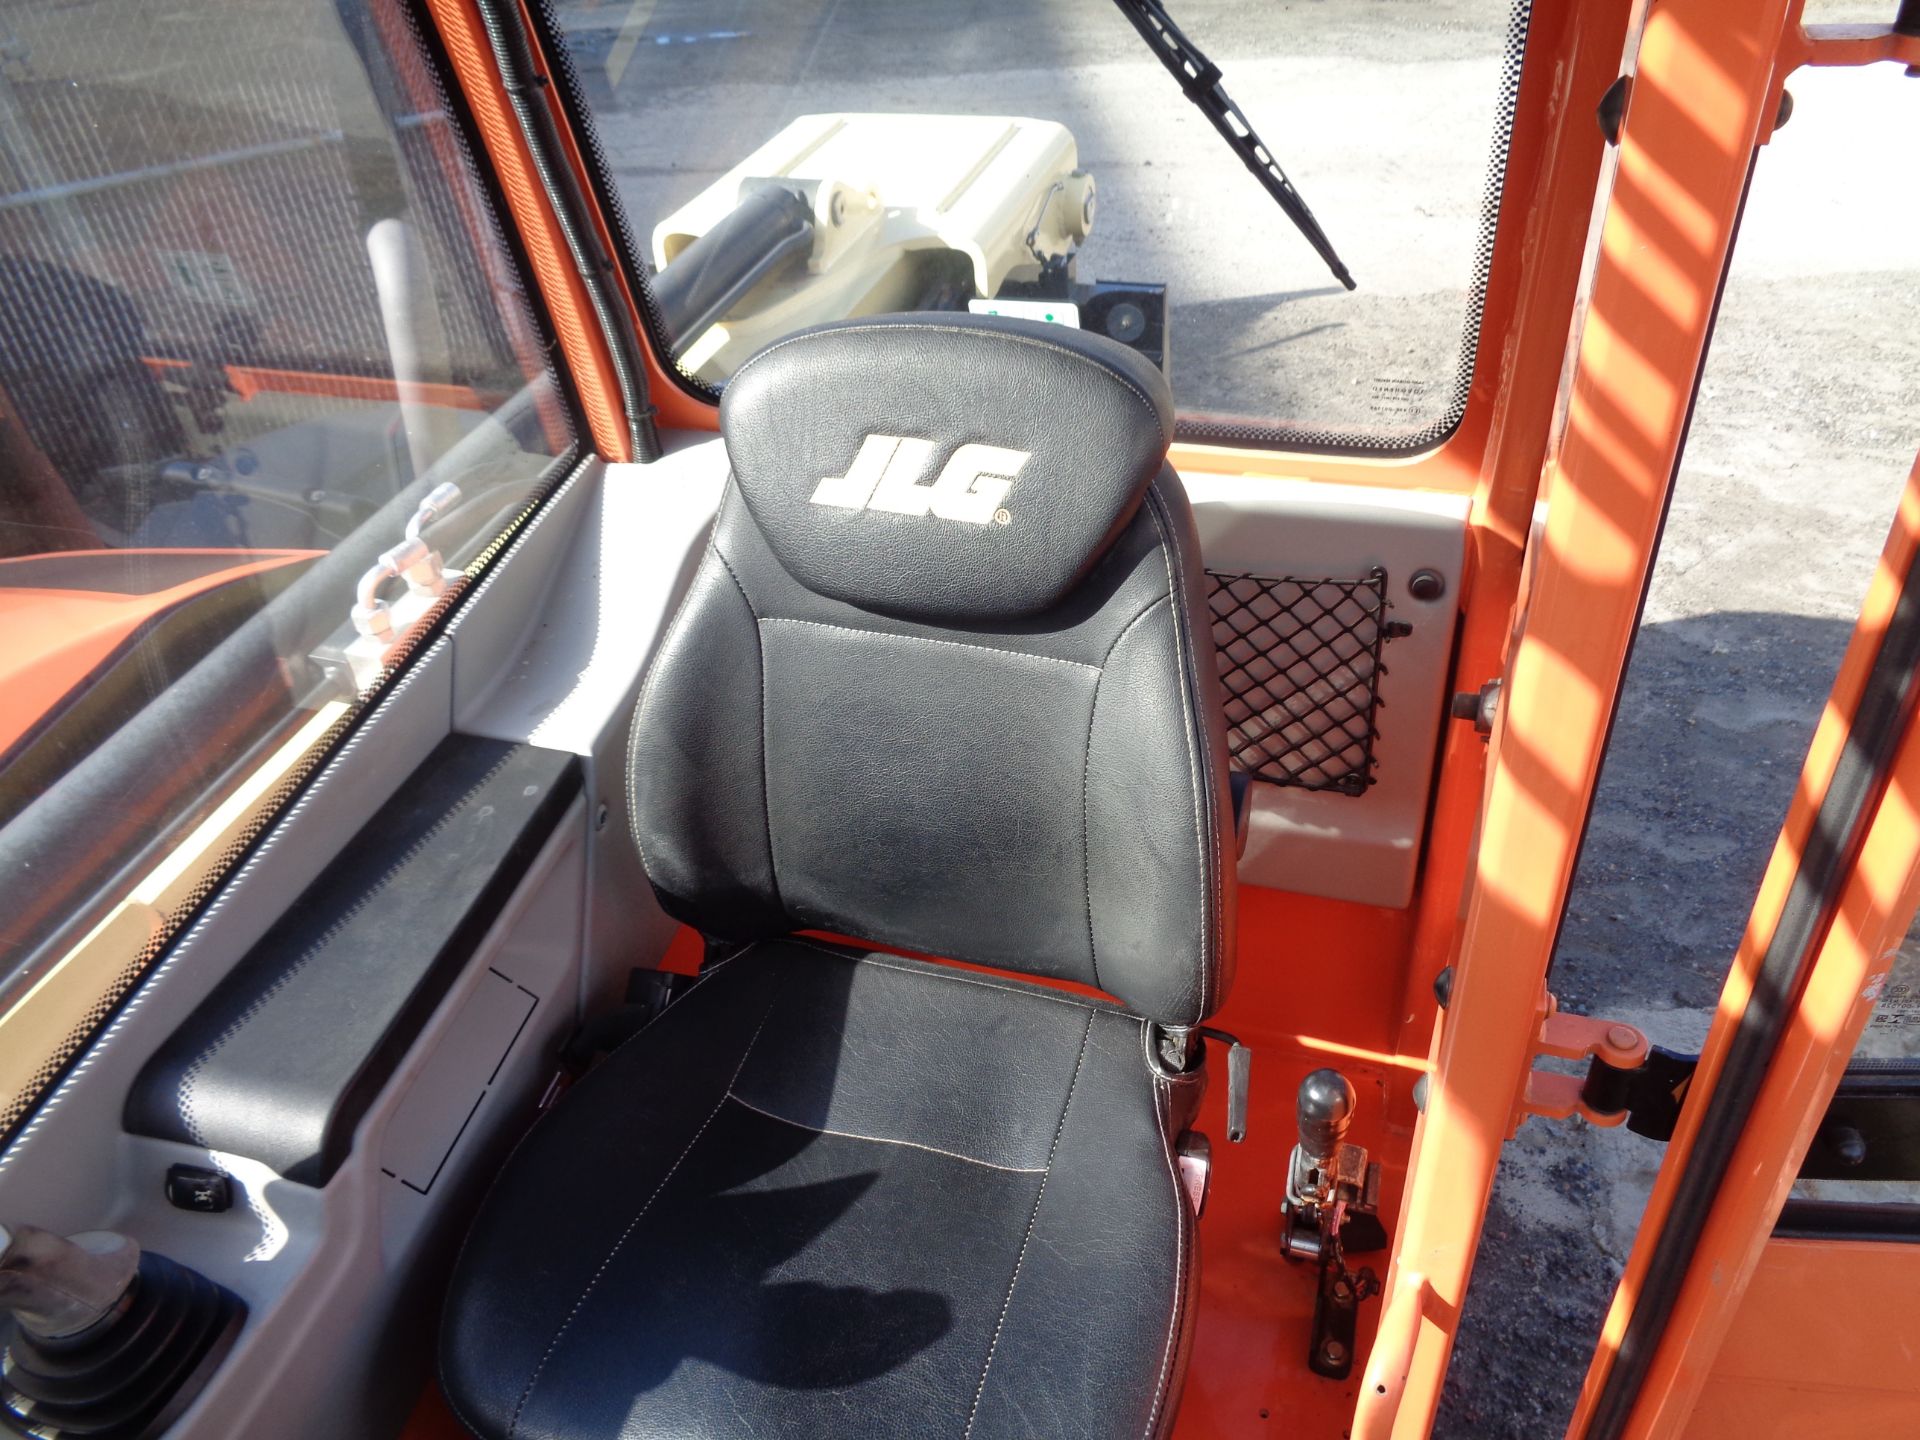 2016 JLG 3614RS 8,000lb Telescopic Forklift Only 356 Hours - Image 19 of 21